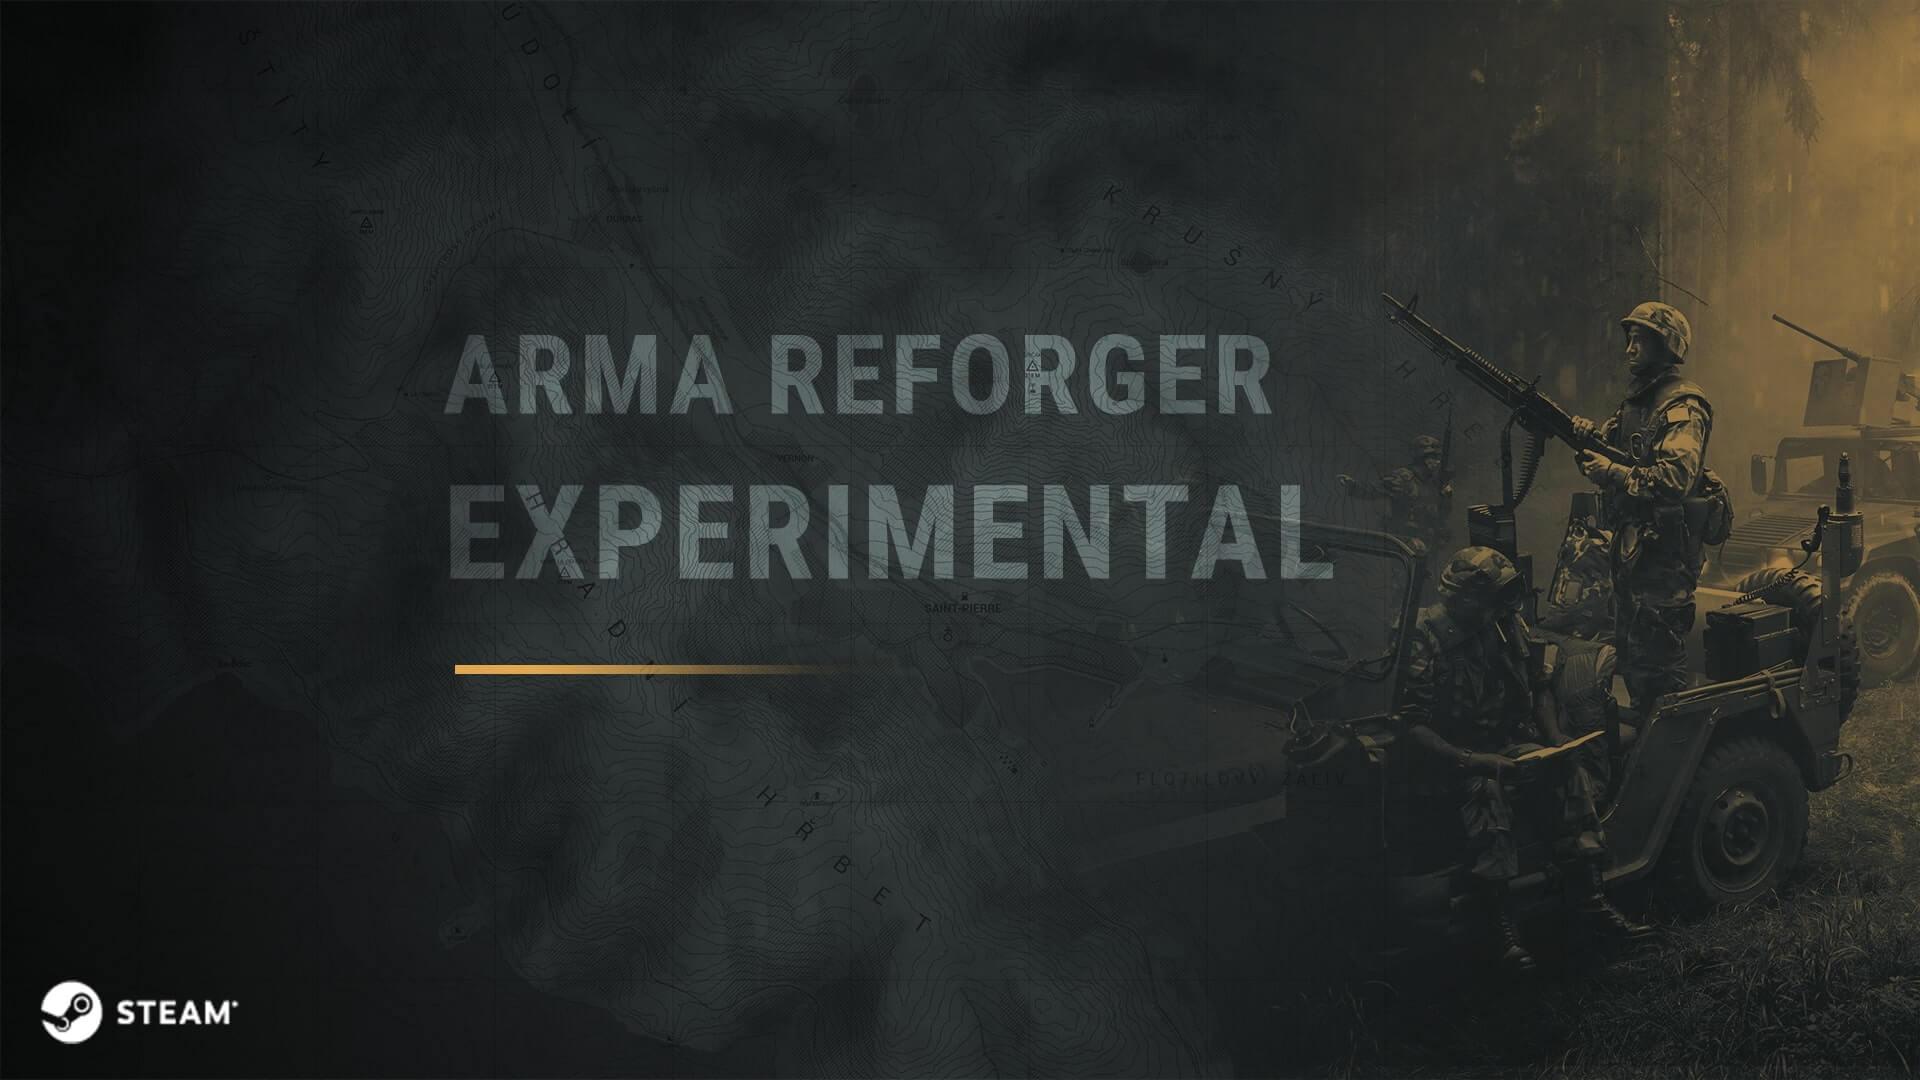 Cover image of Arma Reforger Experimental